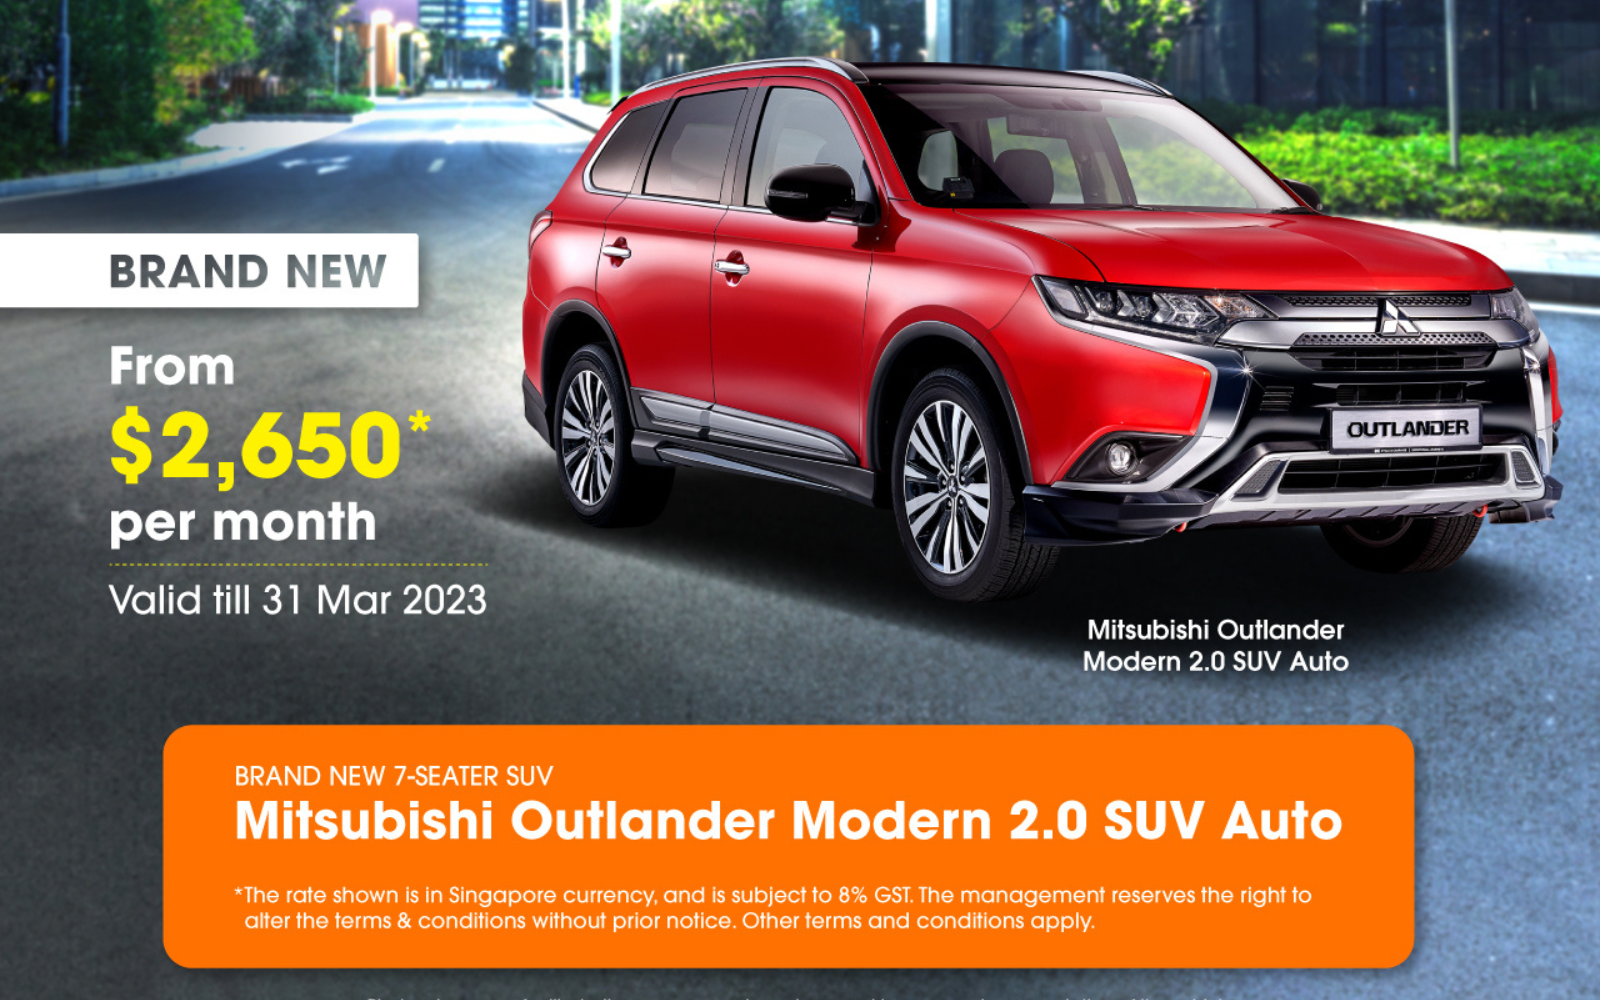 From now till 31 Mar 2023, rent a Brand New Mitsubishi Outlander Modern 2.0 SUV Auto from $2,650* per month only.